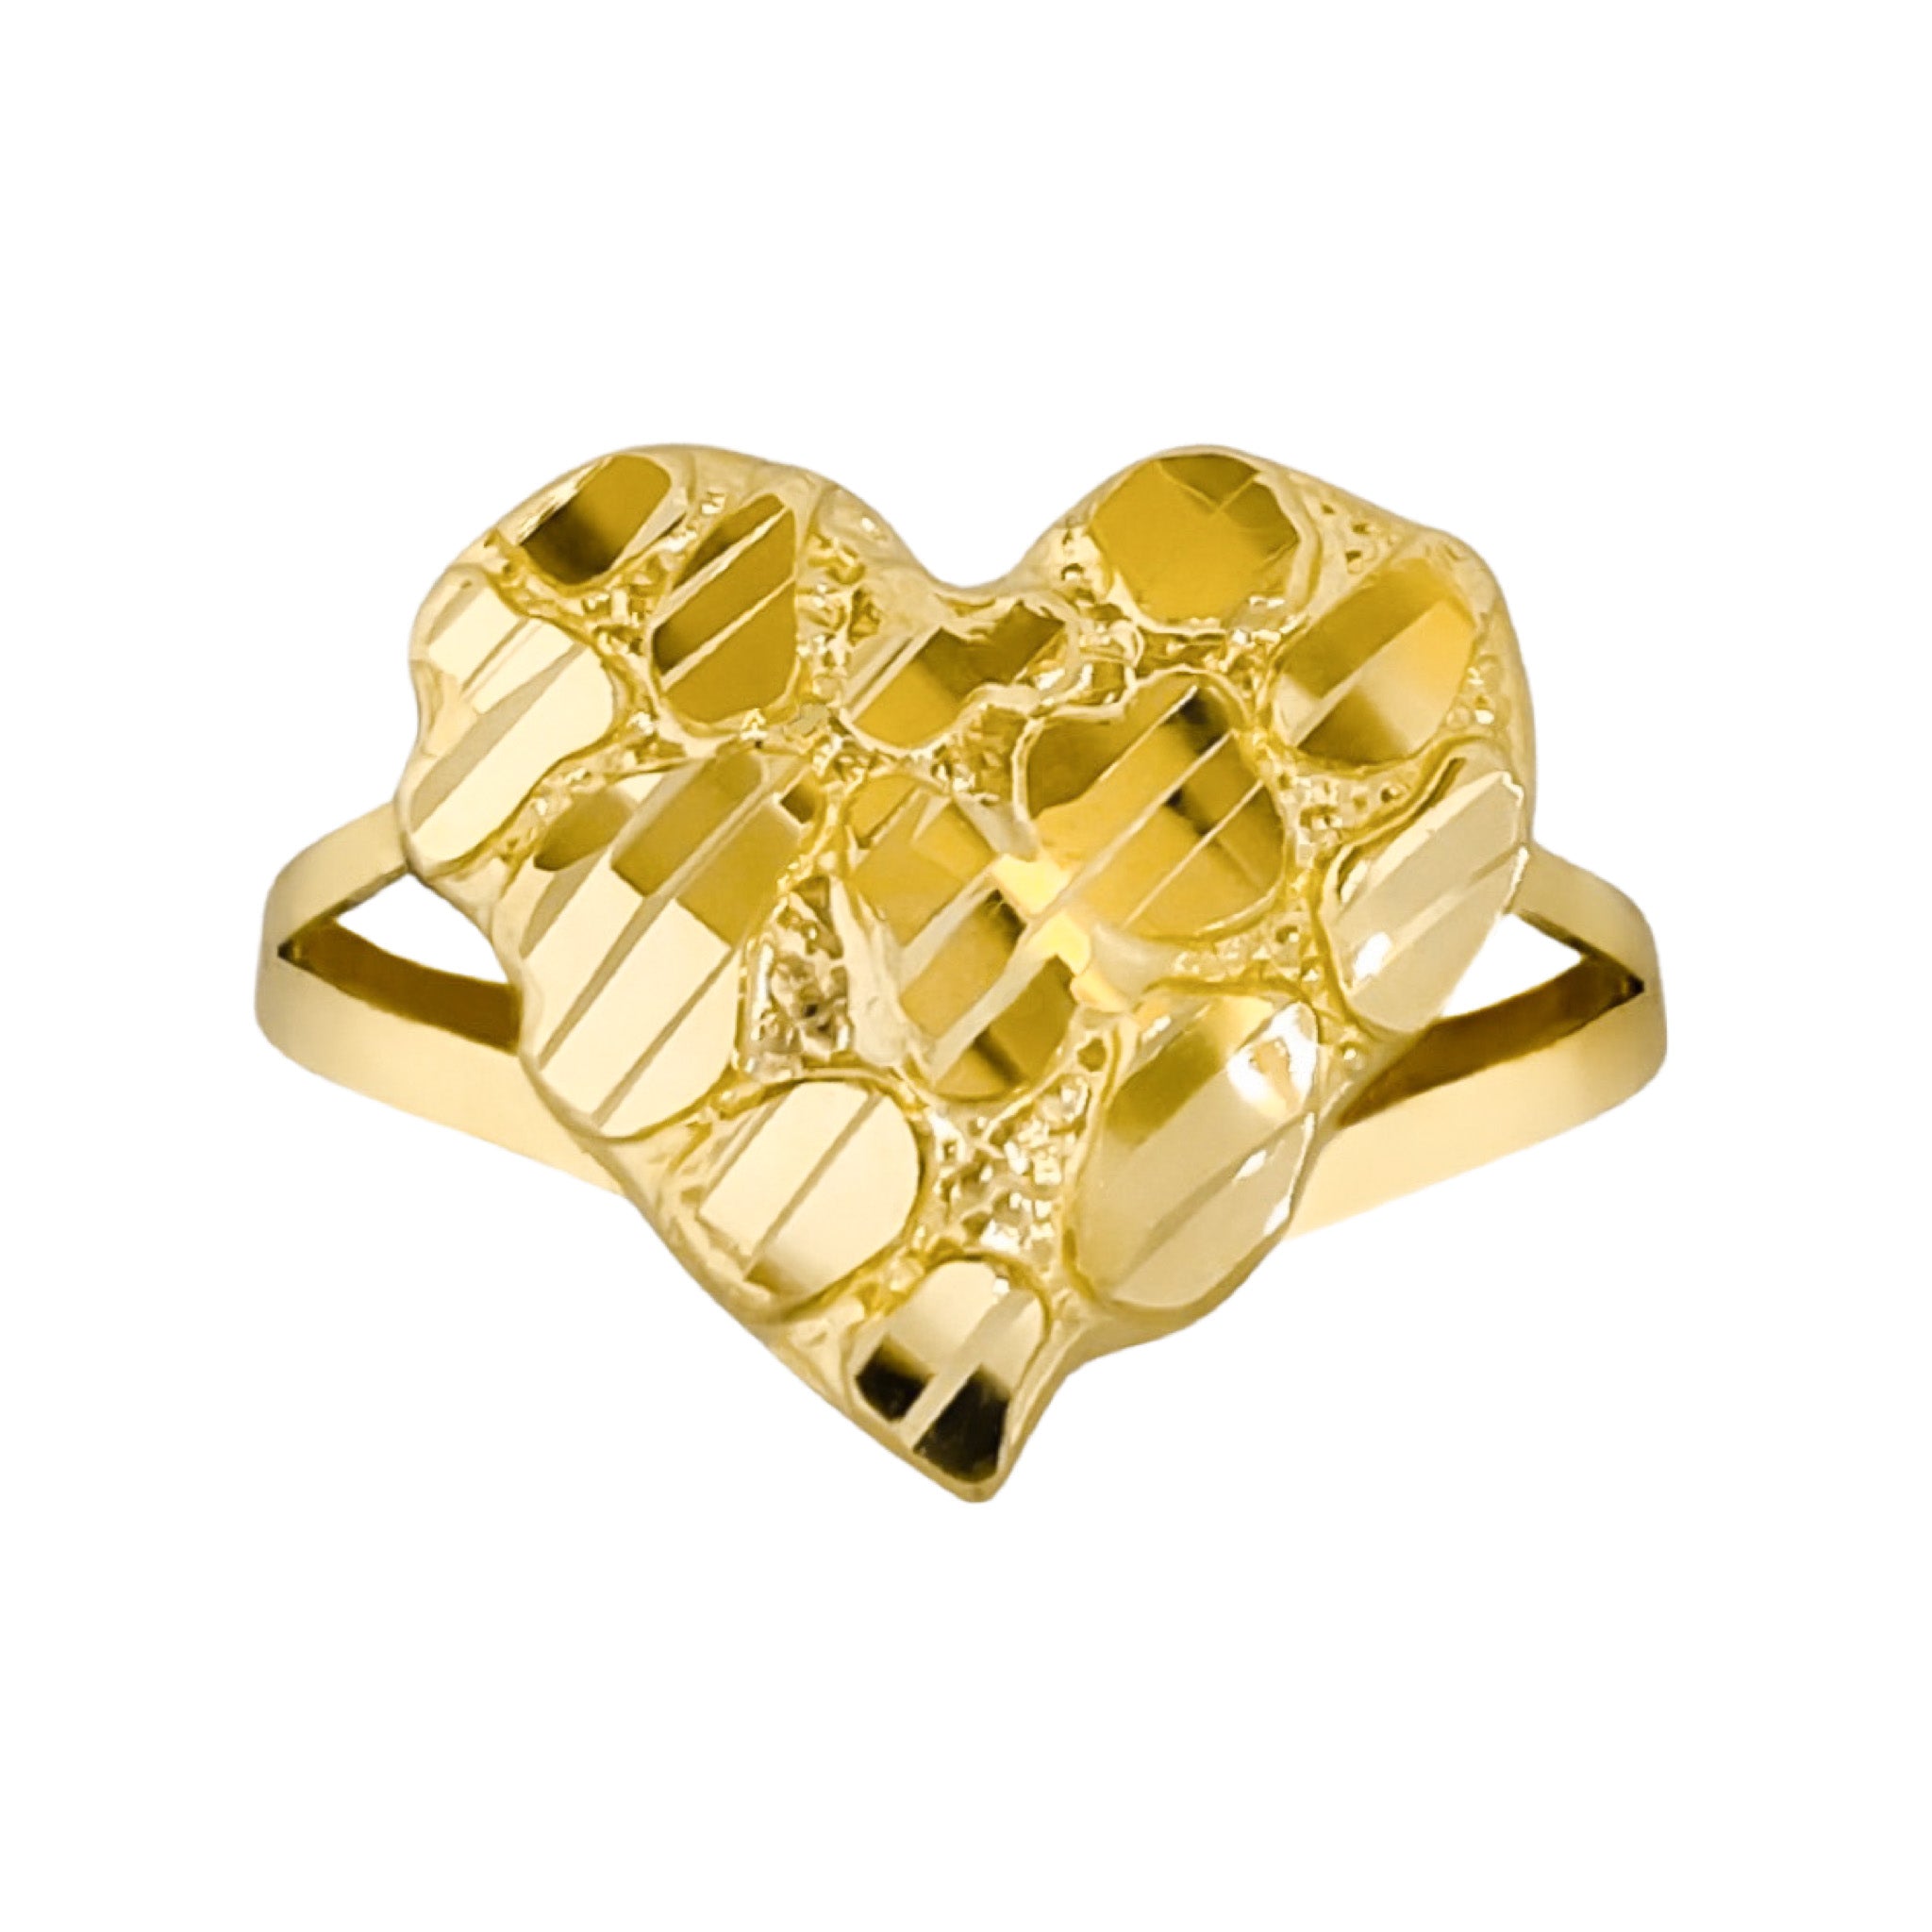 10K YELLOW GOLD NUGGET PUFF HEART RING